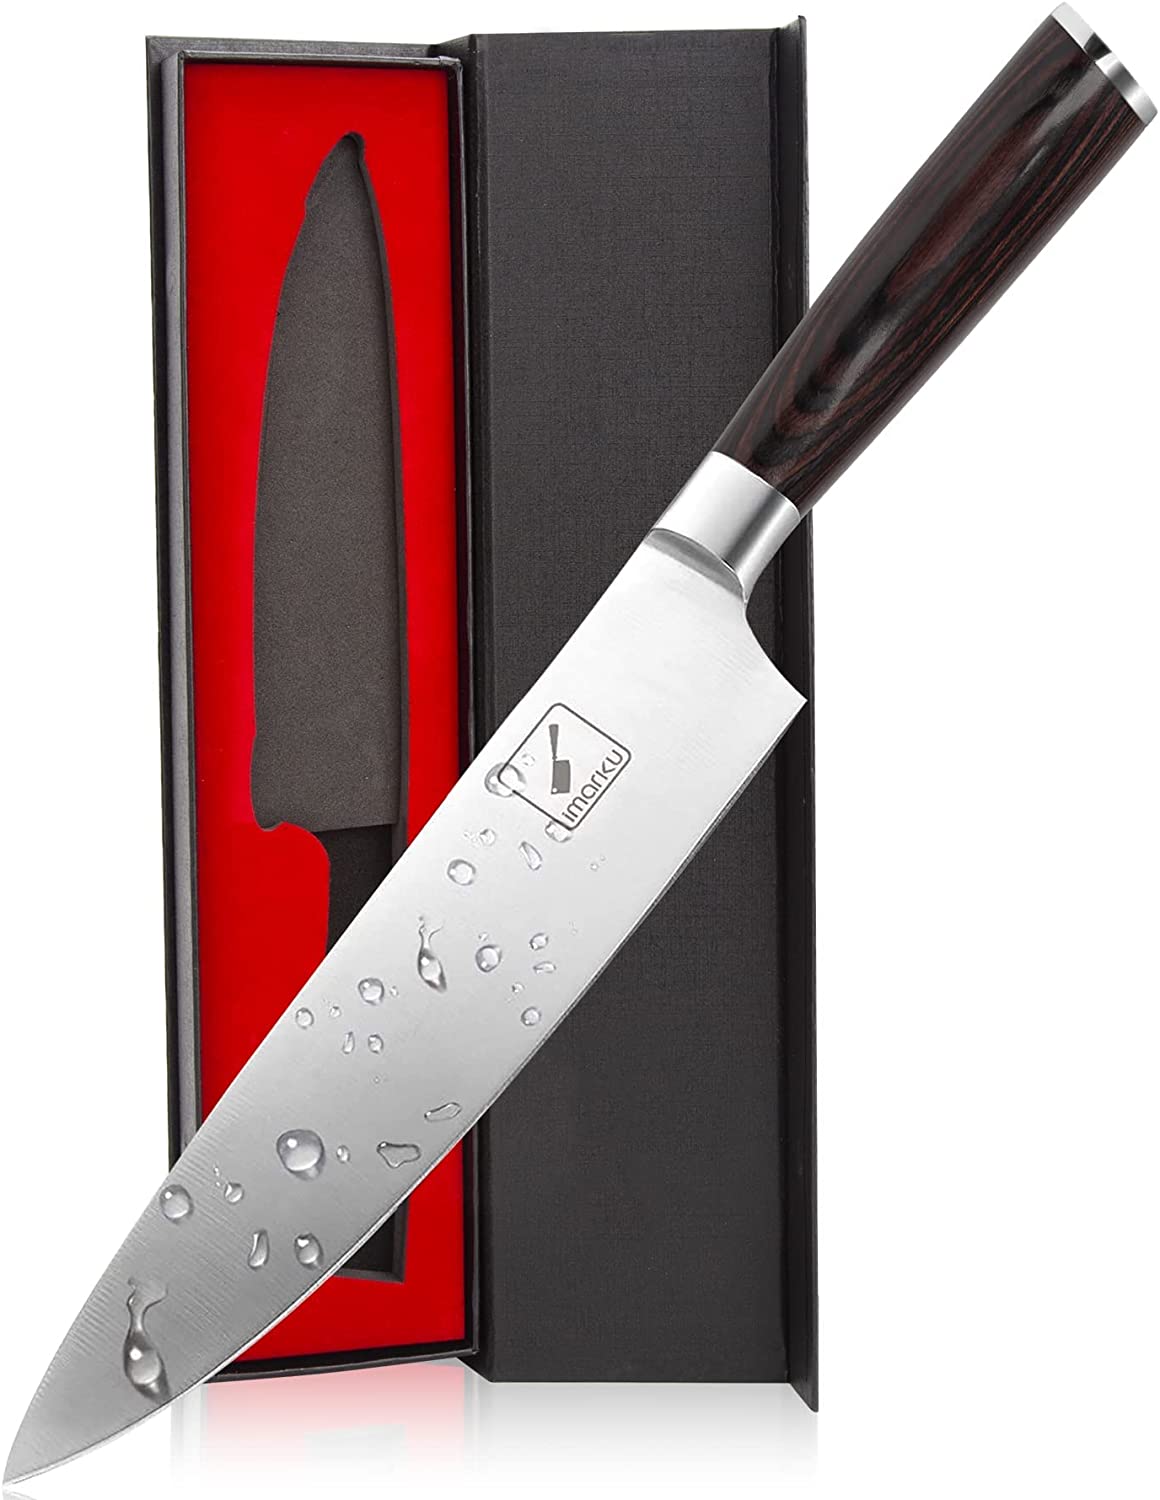 A Review of the Best Chef Knife